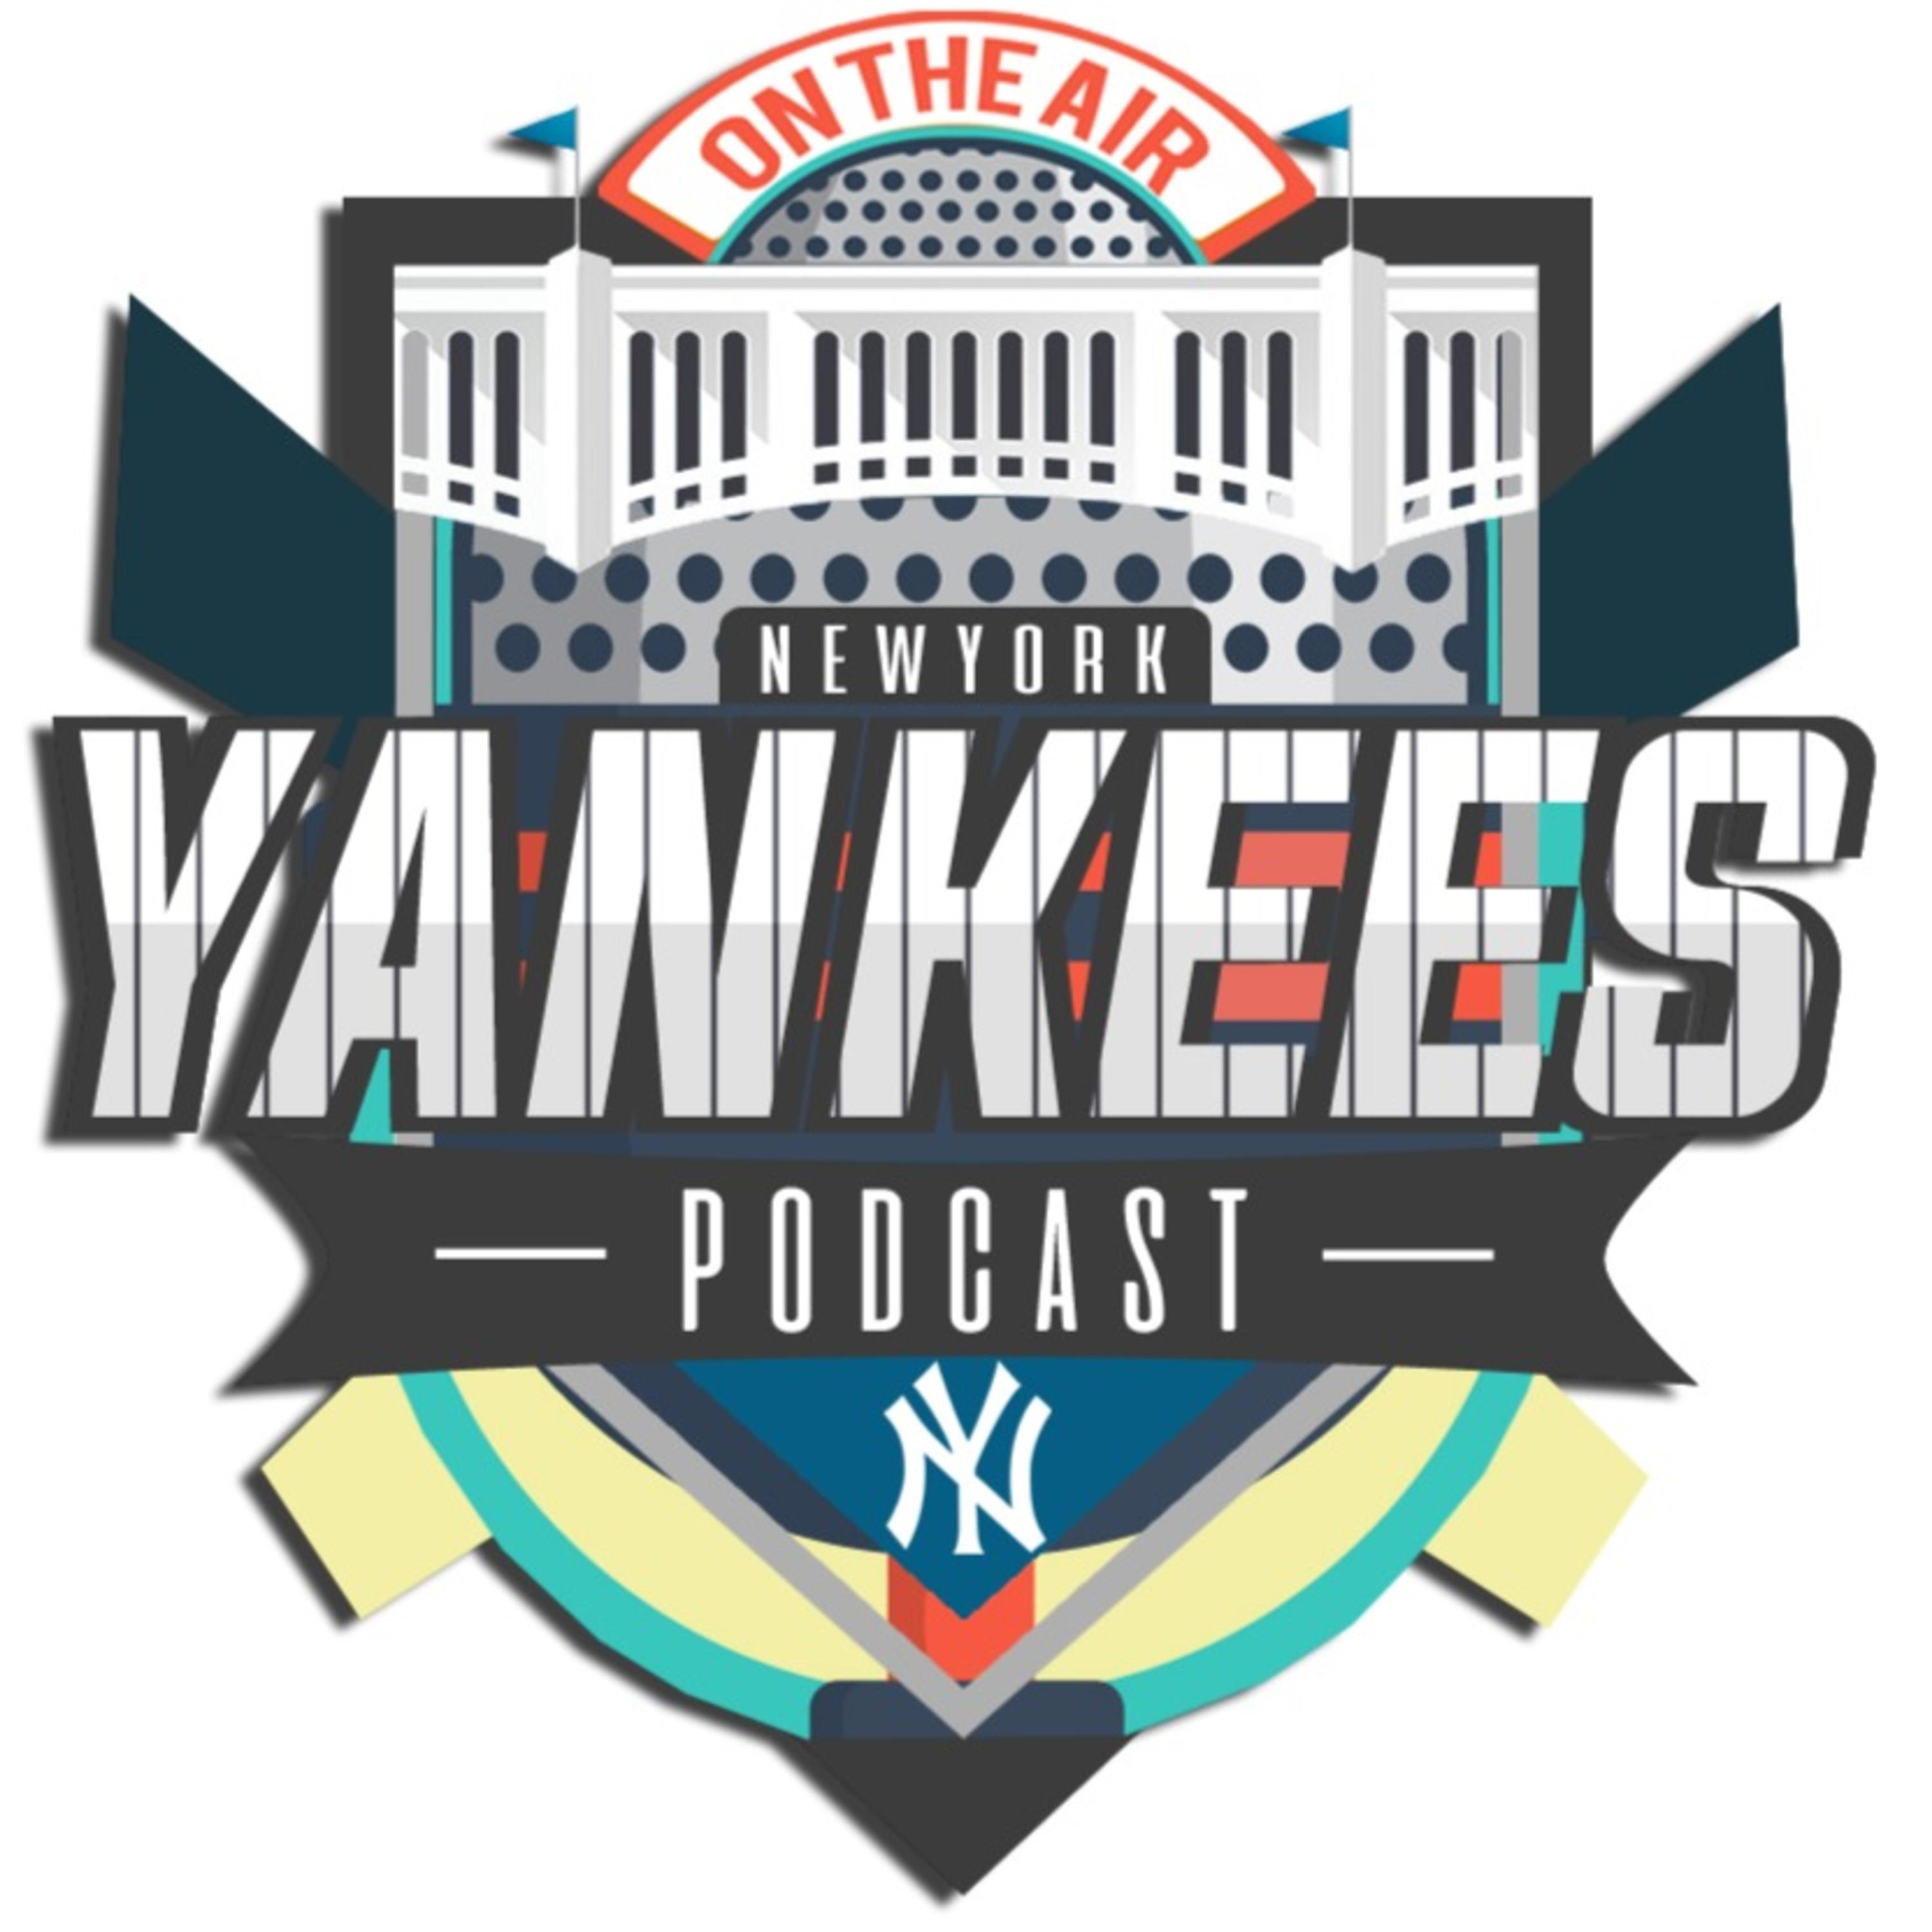 New York Yankees Hungary Podcast - Intro (Long Version)